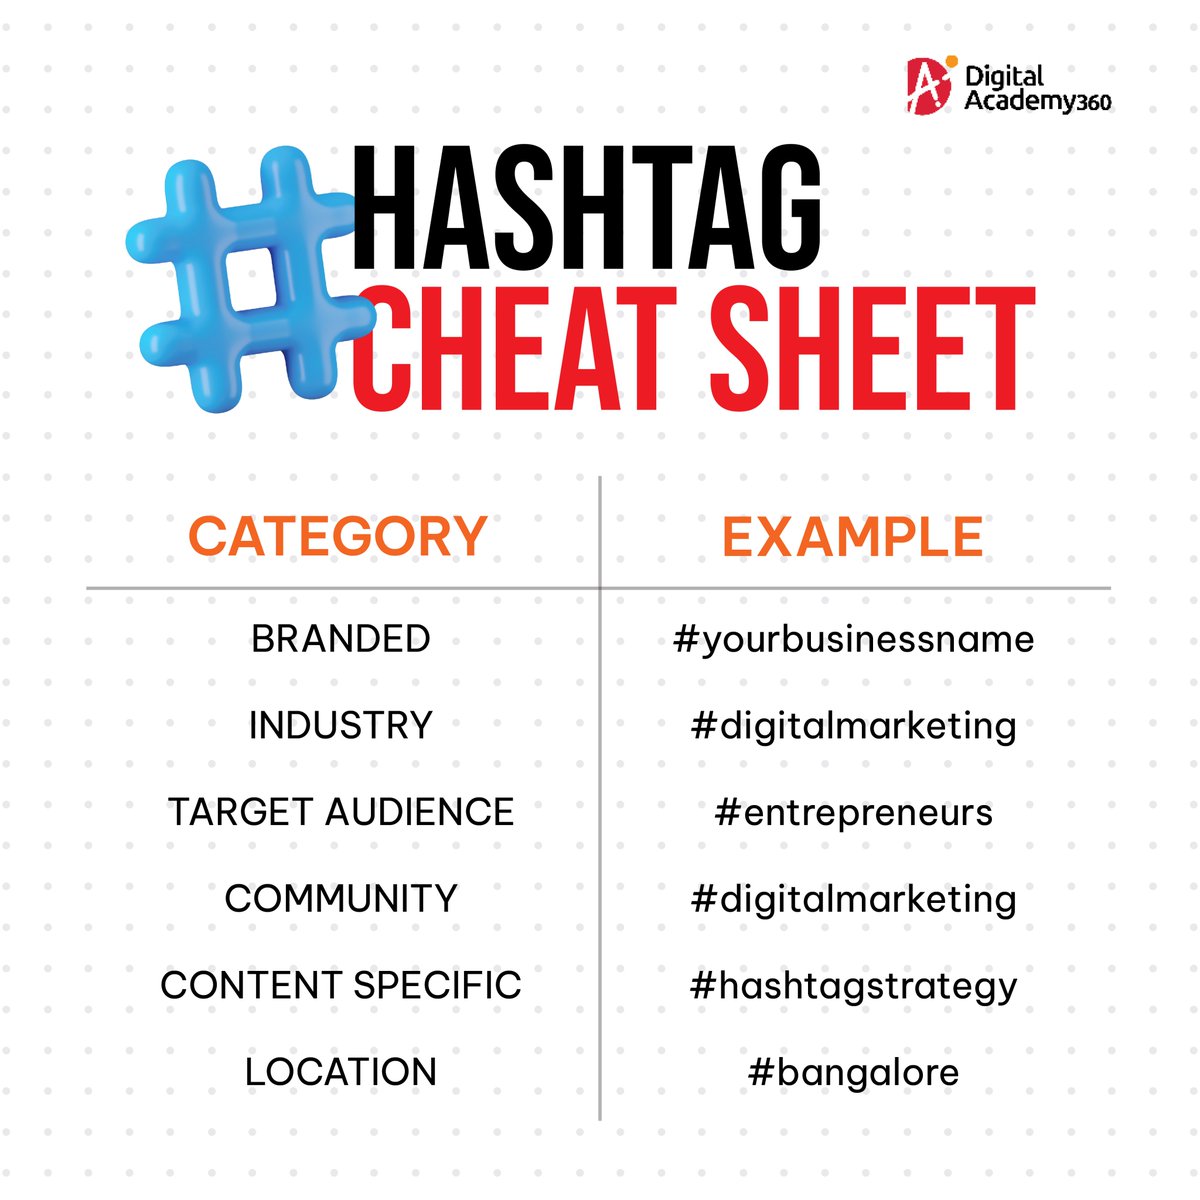 Here’s what you need to know when it comes to creating a #hashtagstrategy👇
Your strategy needs to align with your goals. What audience are you trying to reach? Who do you want to see this specific piece of content? Who is it relevant to?

#DigitalMarketing #BusinessOwners #DA360